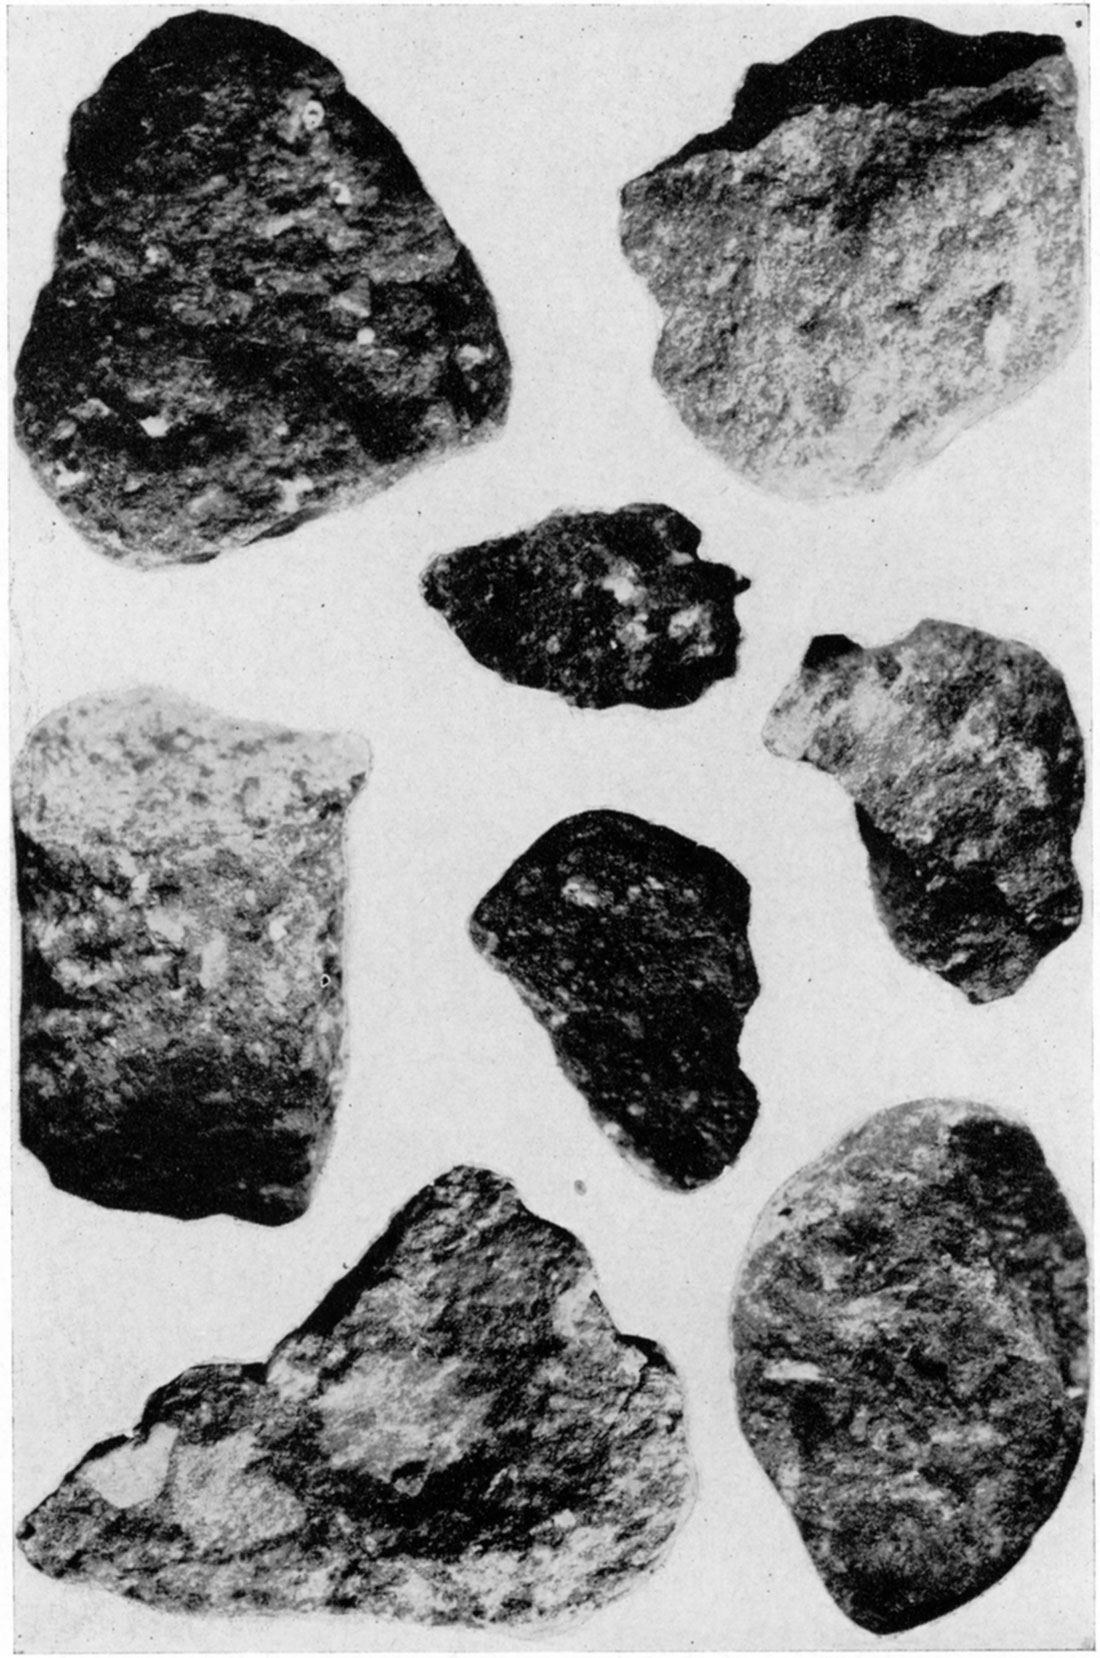 Photomicrographs of cuttings from wells showing clastic character of black shale cave deposits in Mississippian limestones (X 10).